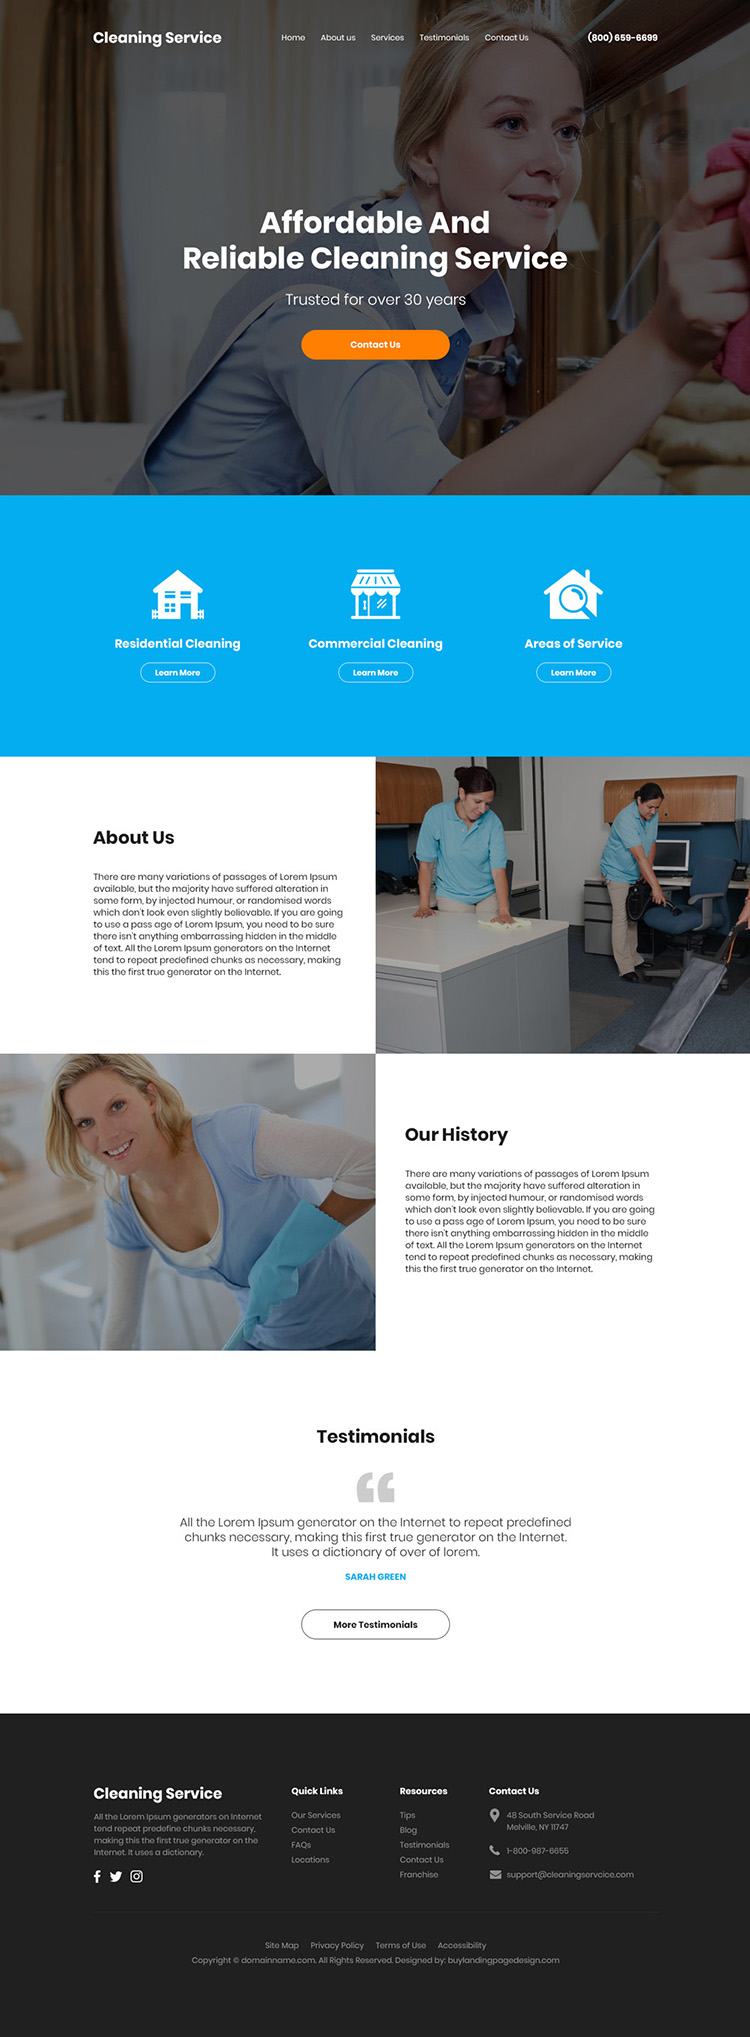 residential and commercial cleaning service company website design